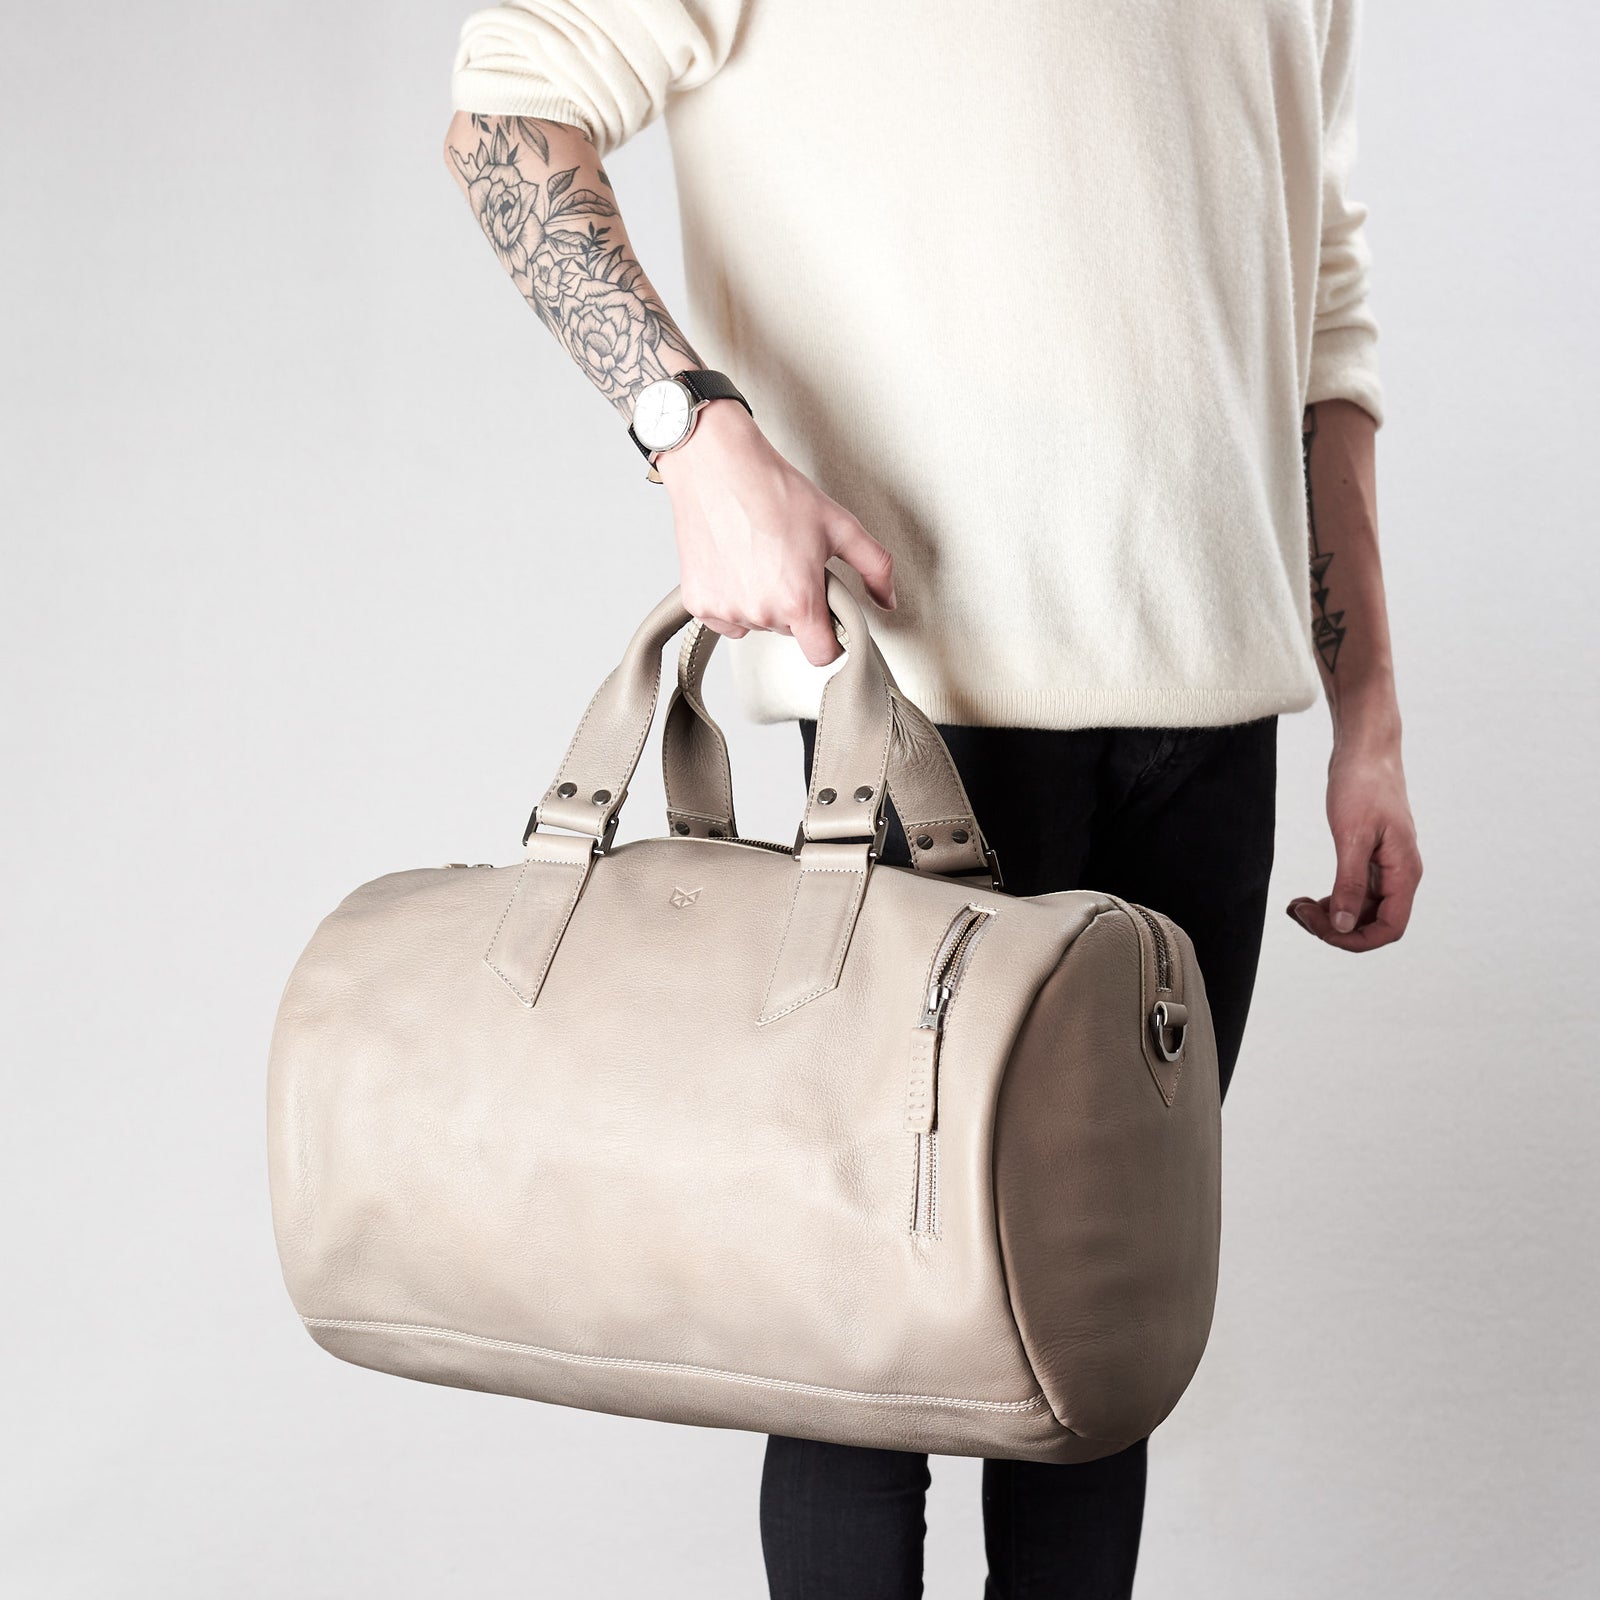 Style. Substantial grey duffle bag by Capra Leather. 